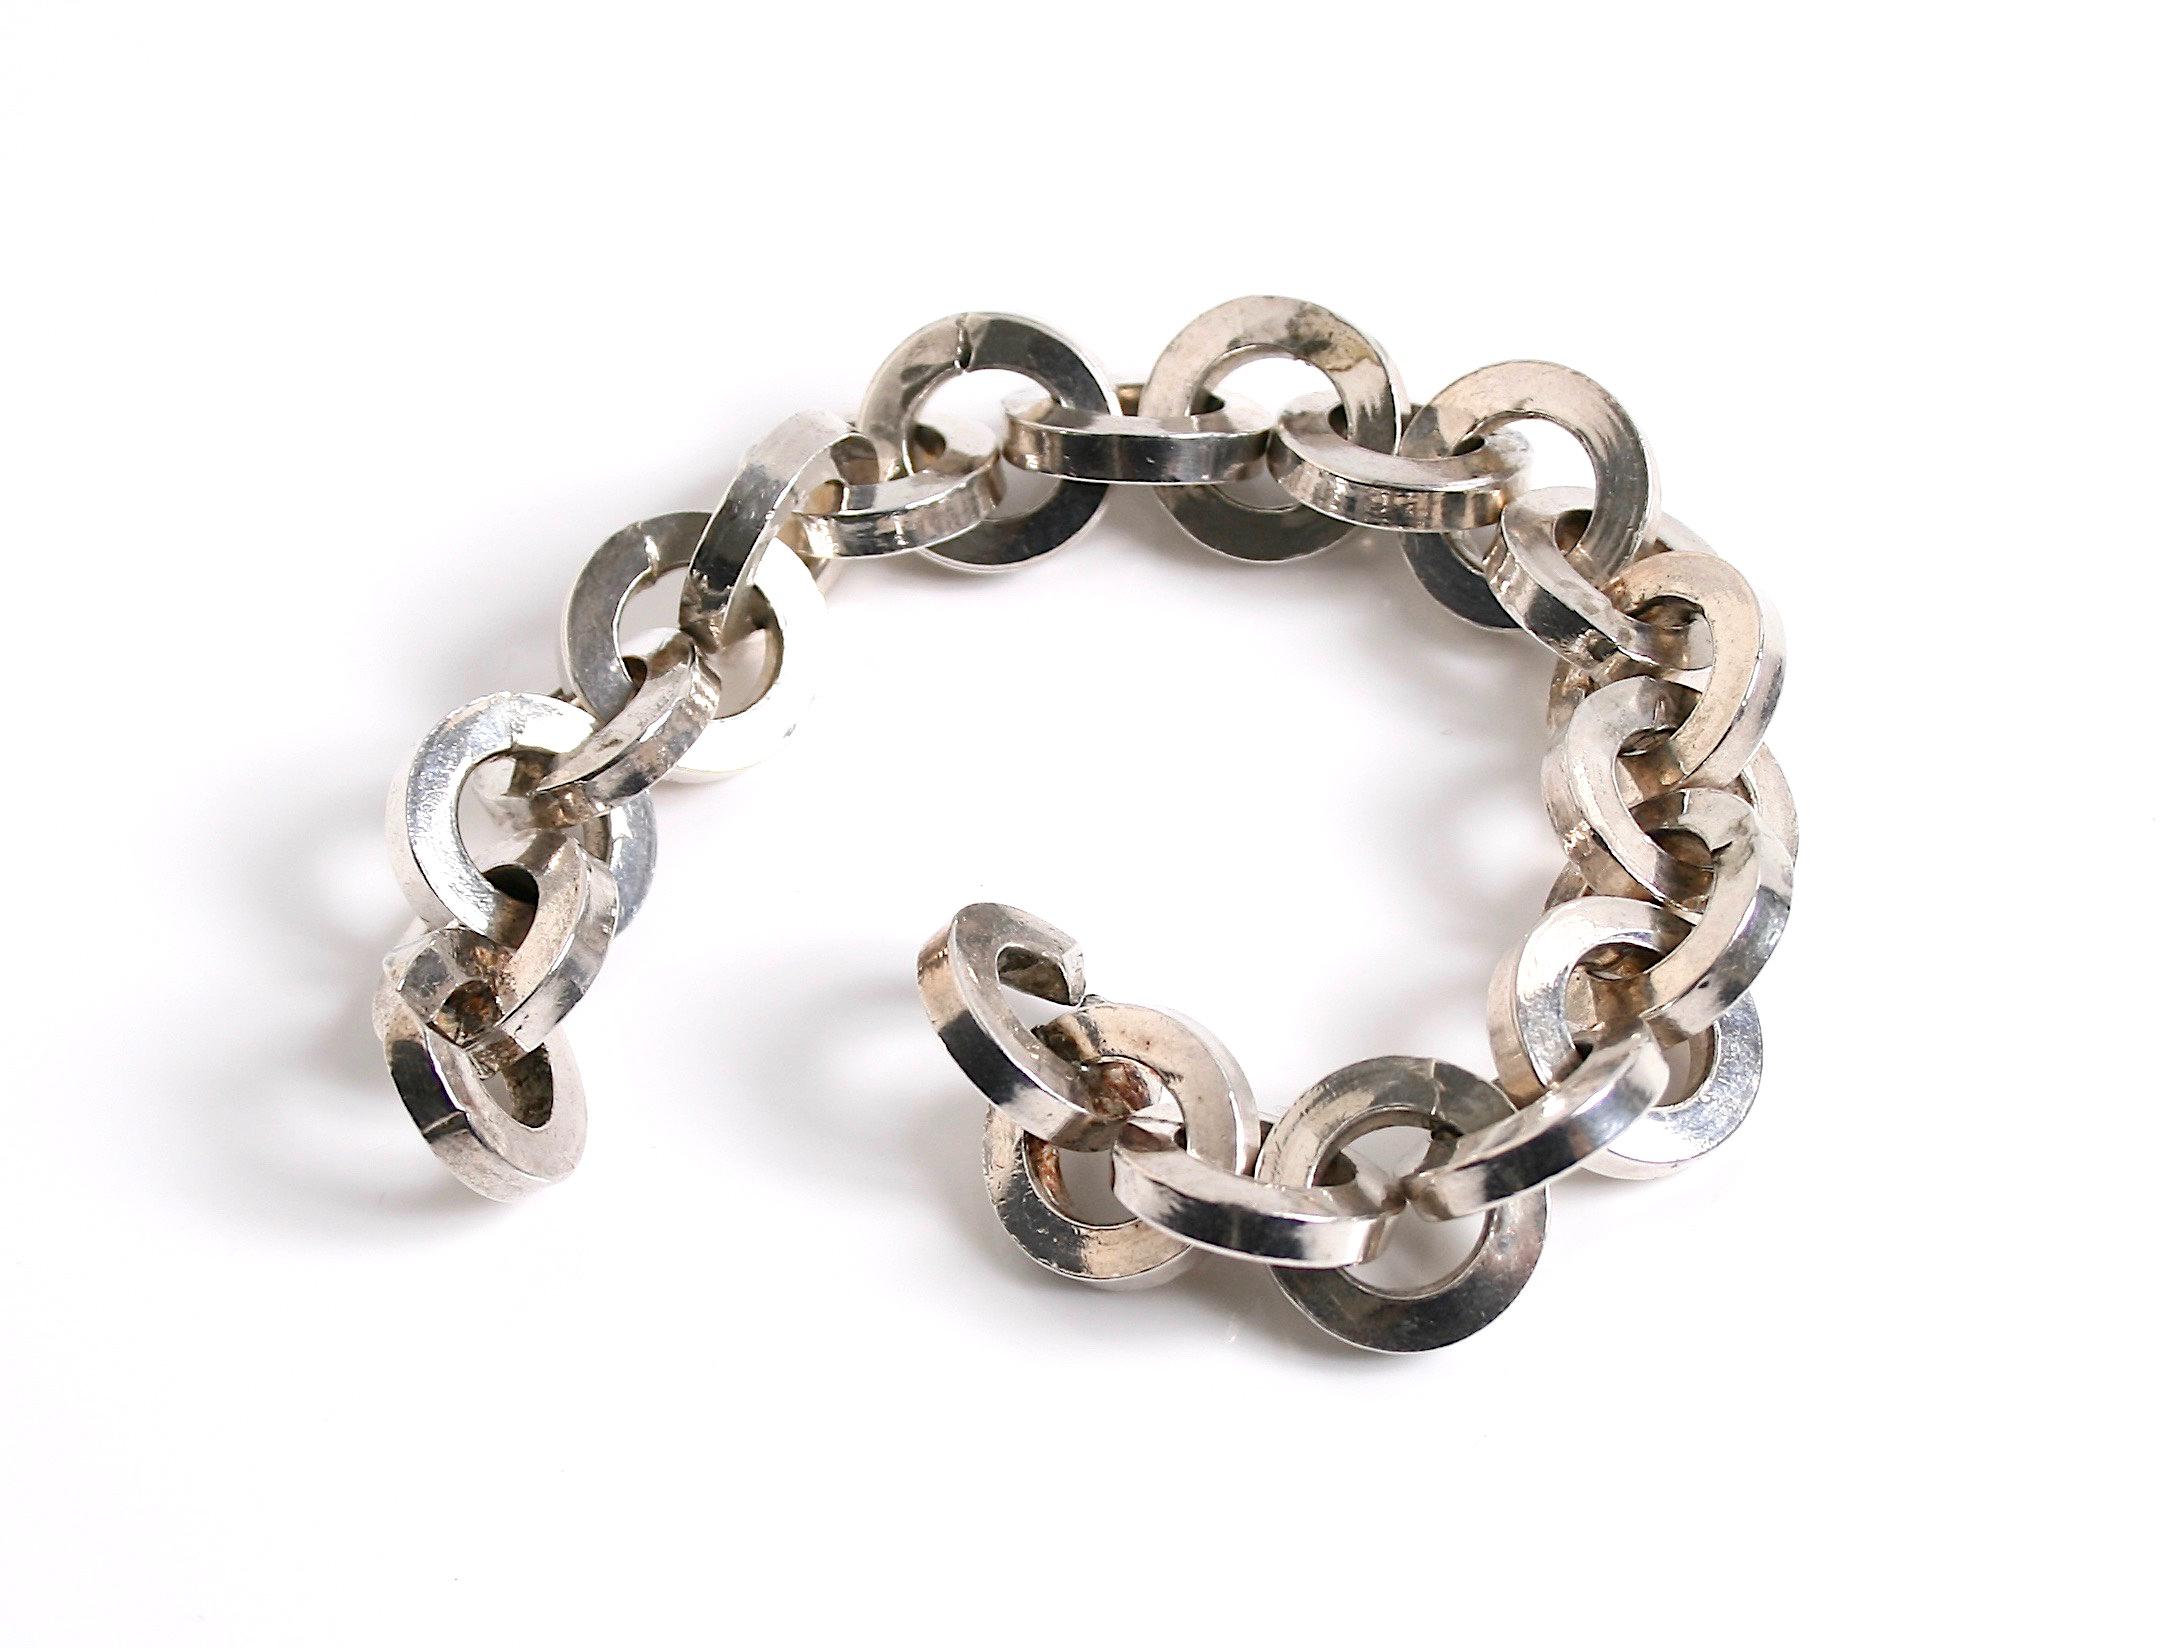 Heavy link sterling silver hand beaten chain bracelet designed by Rey Urban for Age Fausing Denmark c.1970 signed Rey Urban in script  Å Fausing Denmark

Rey Urban, born 1929-2015 in Stockholm he was a Swedish silversmith and designer.
He set up his